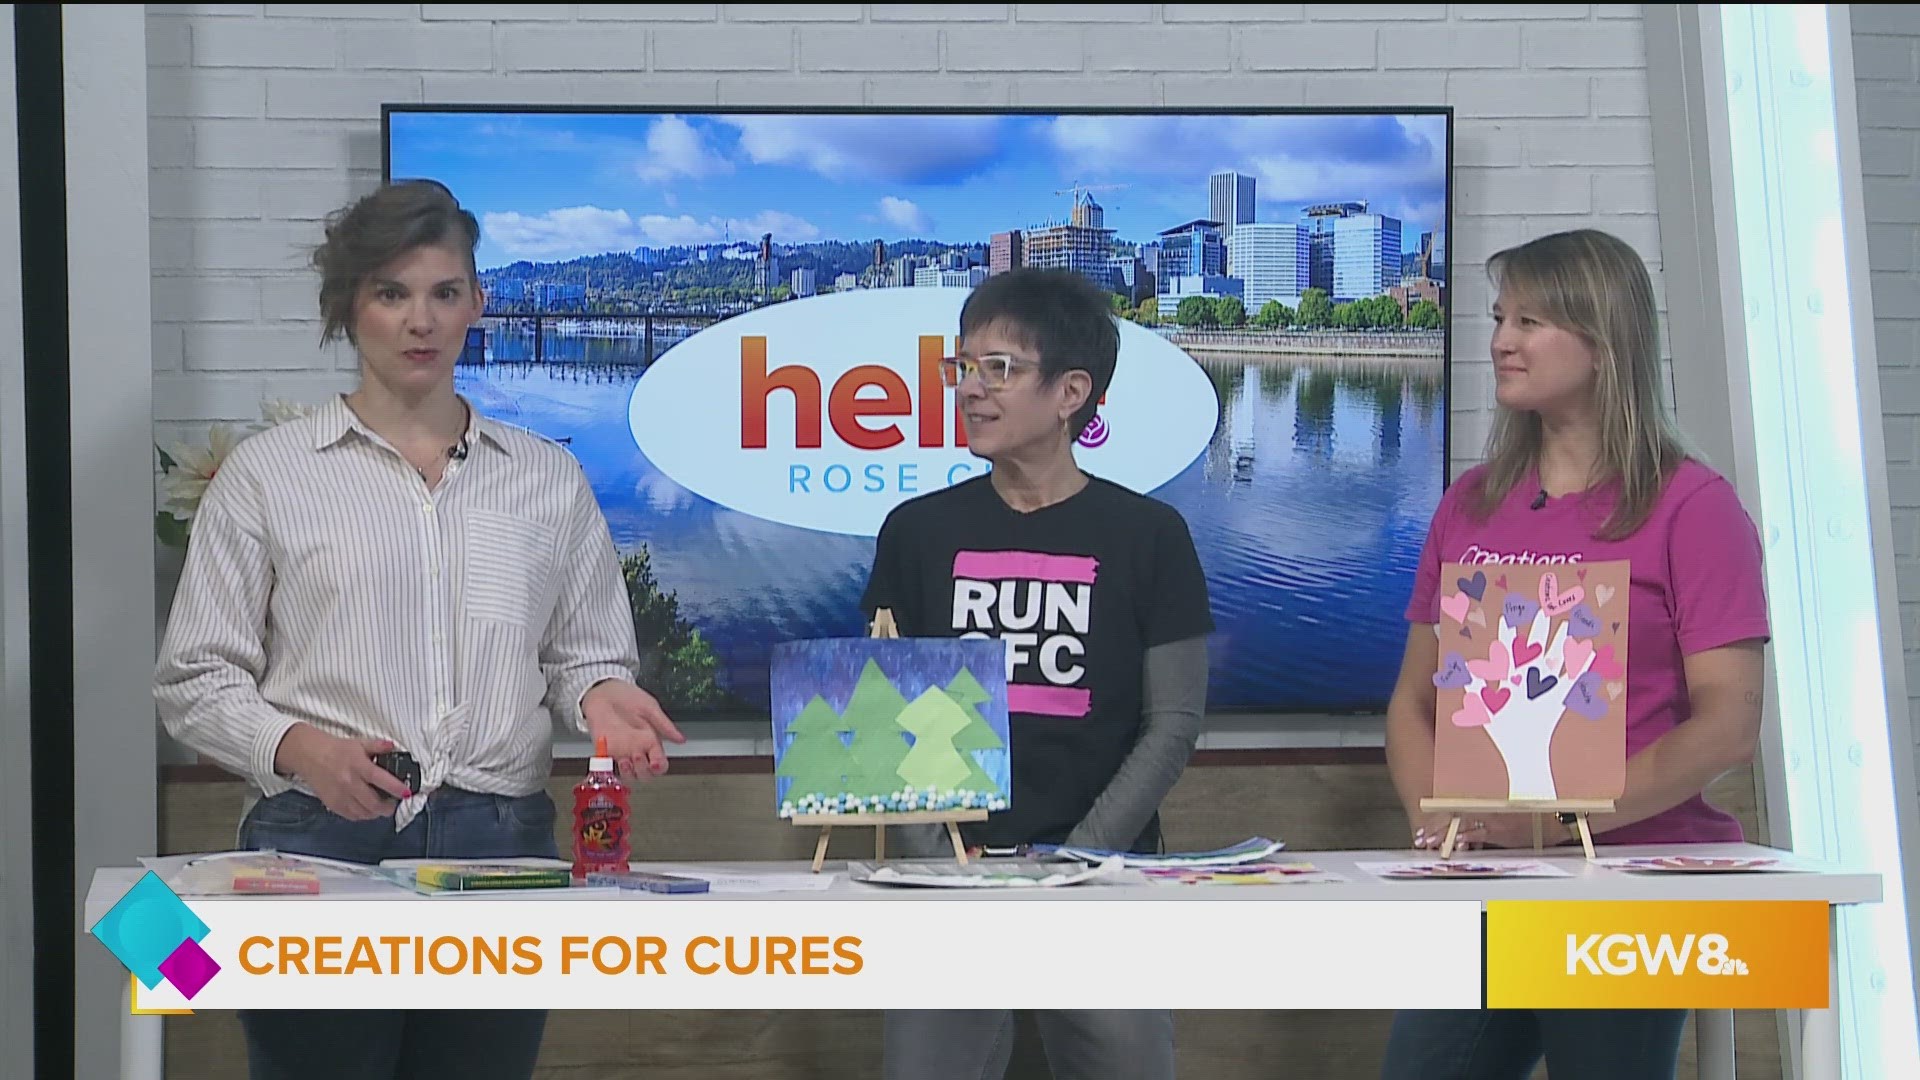 The local non-profit provides art kits and workshops to kids battling cancer